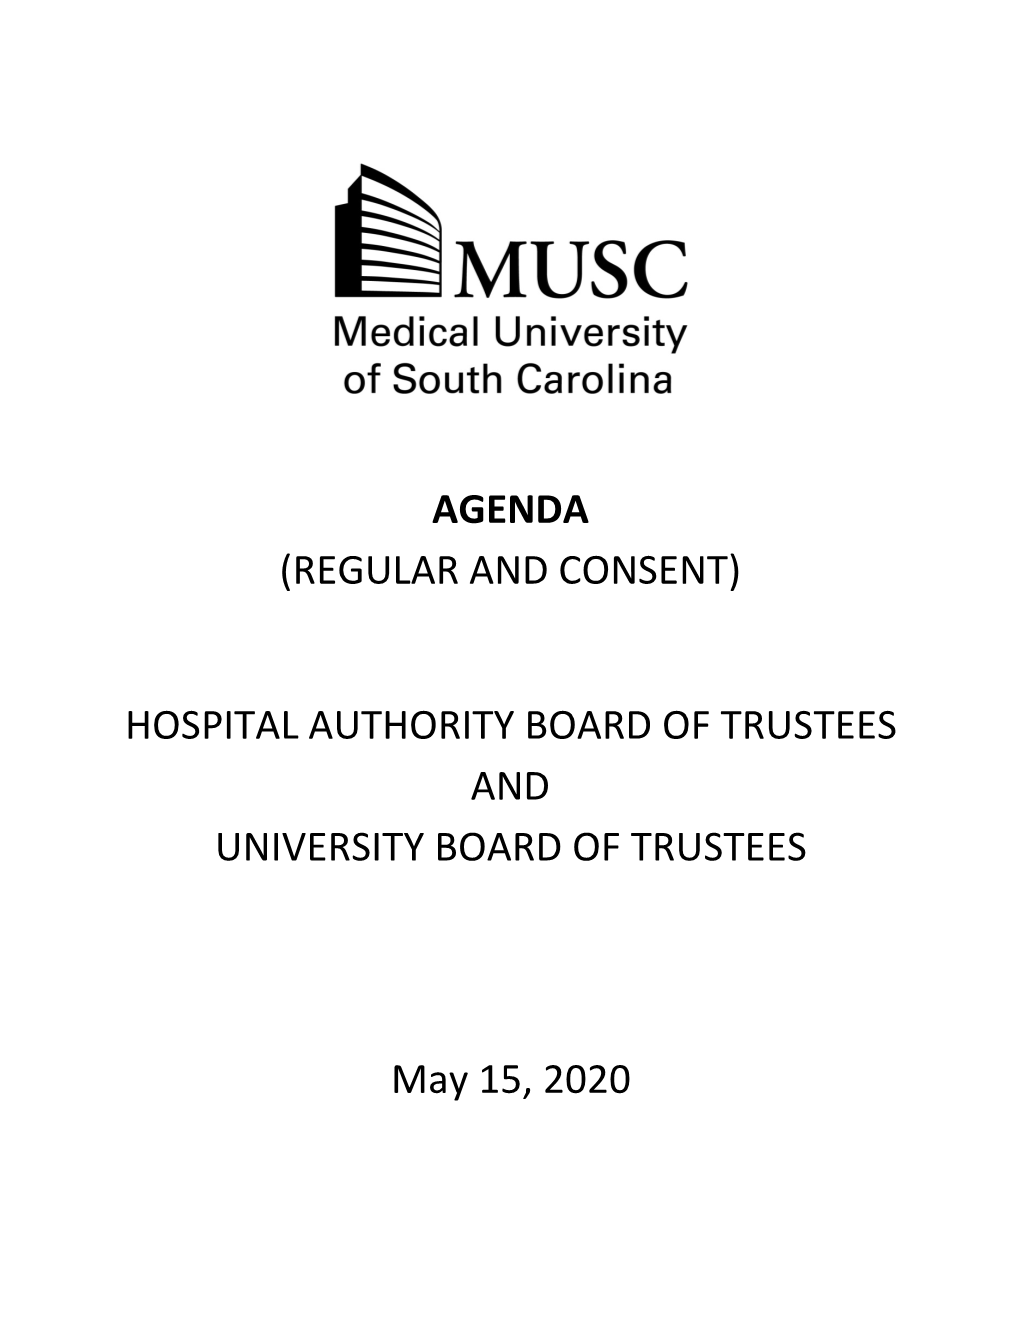 Hospital Authority Board of Trustees and University Board of Trustees